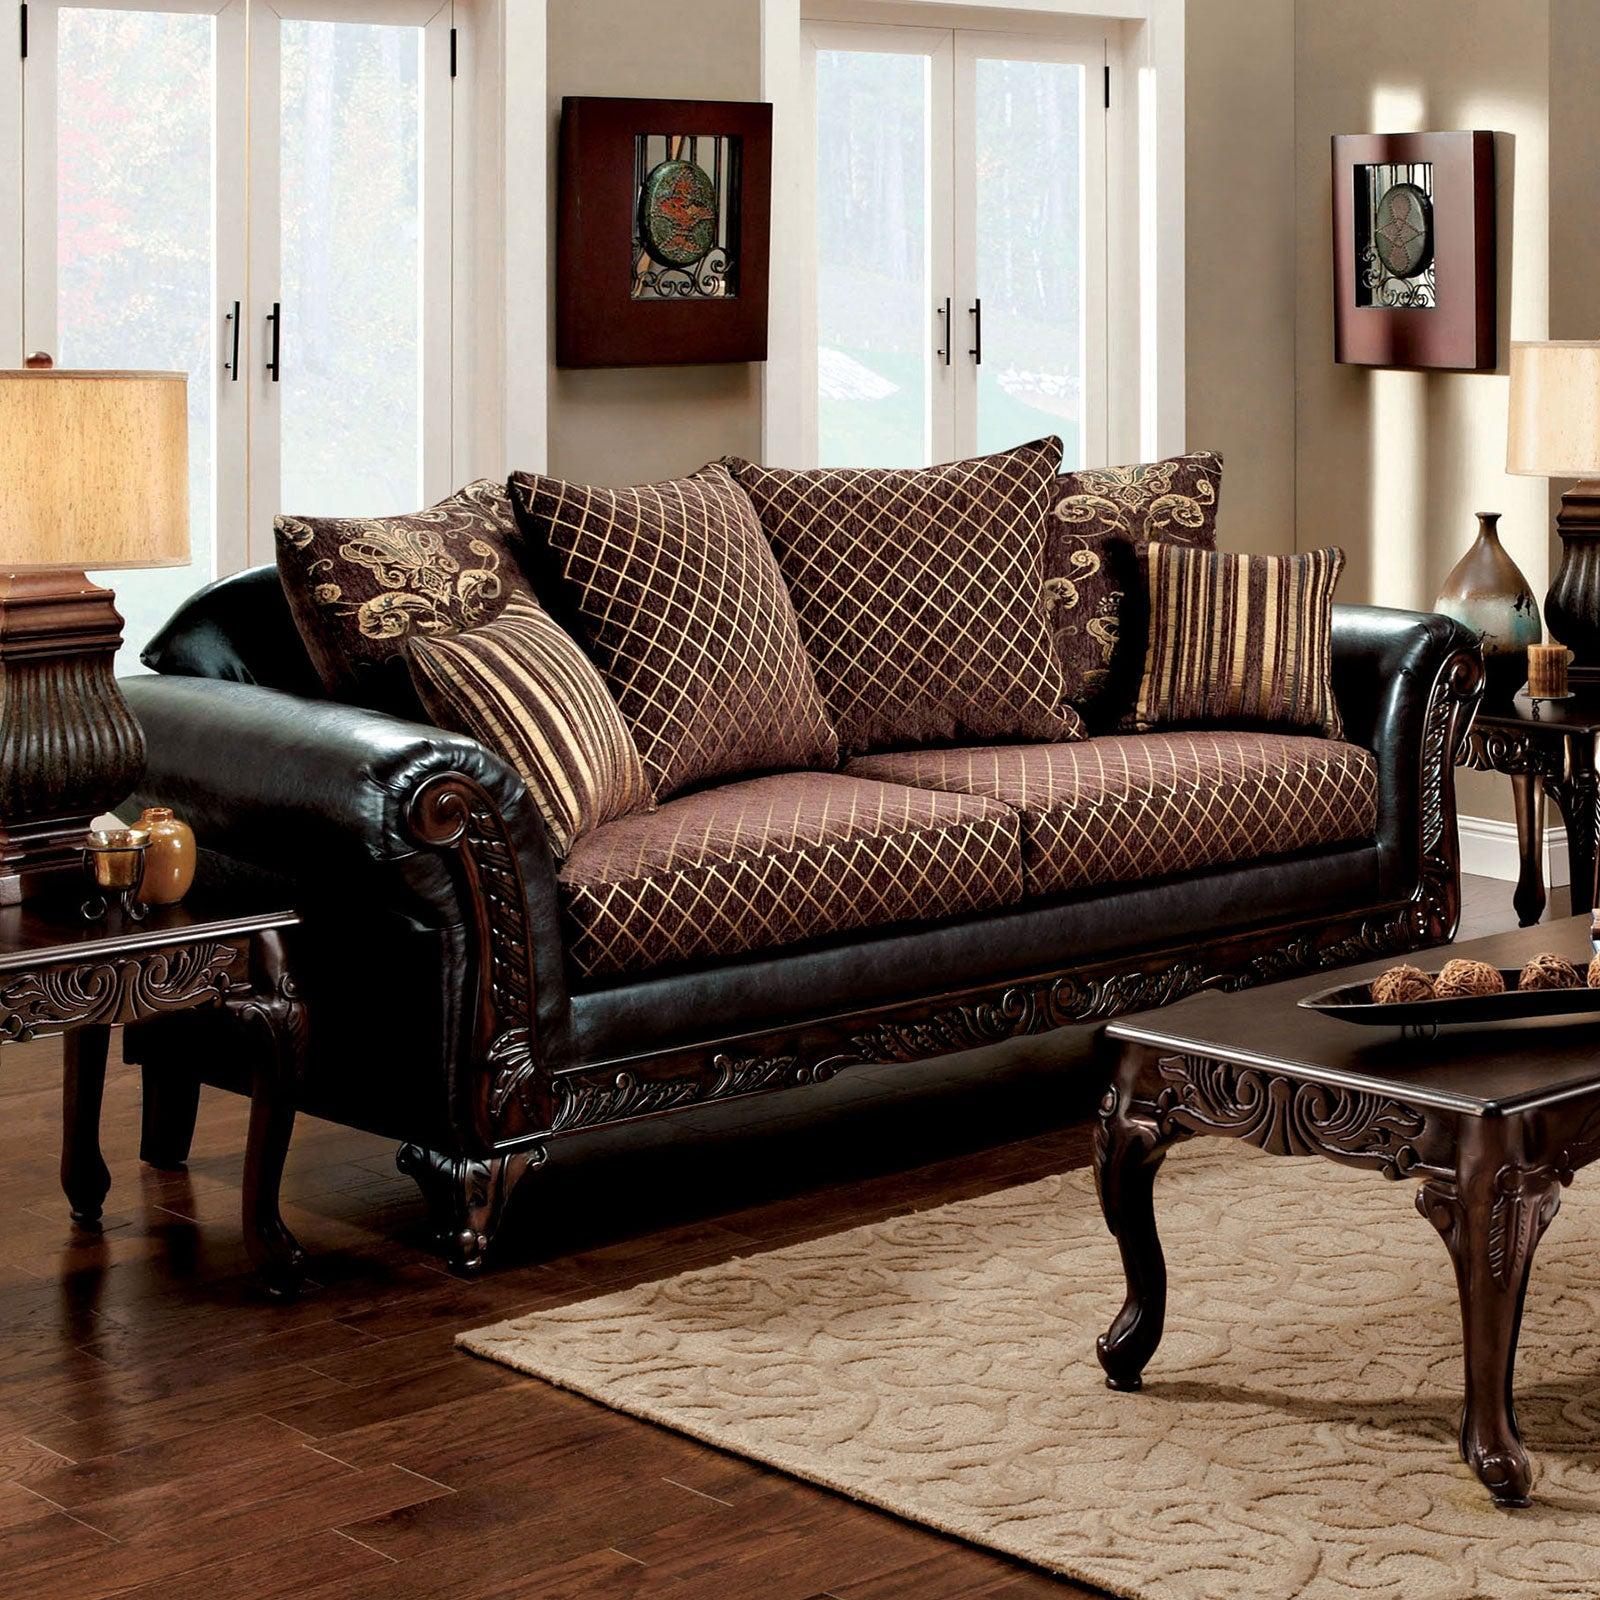 

    
Traditional Brown & Espresso Living Room Set 5pcs Furniture of America San Roque & Cheshire
